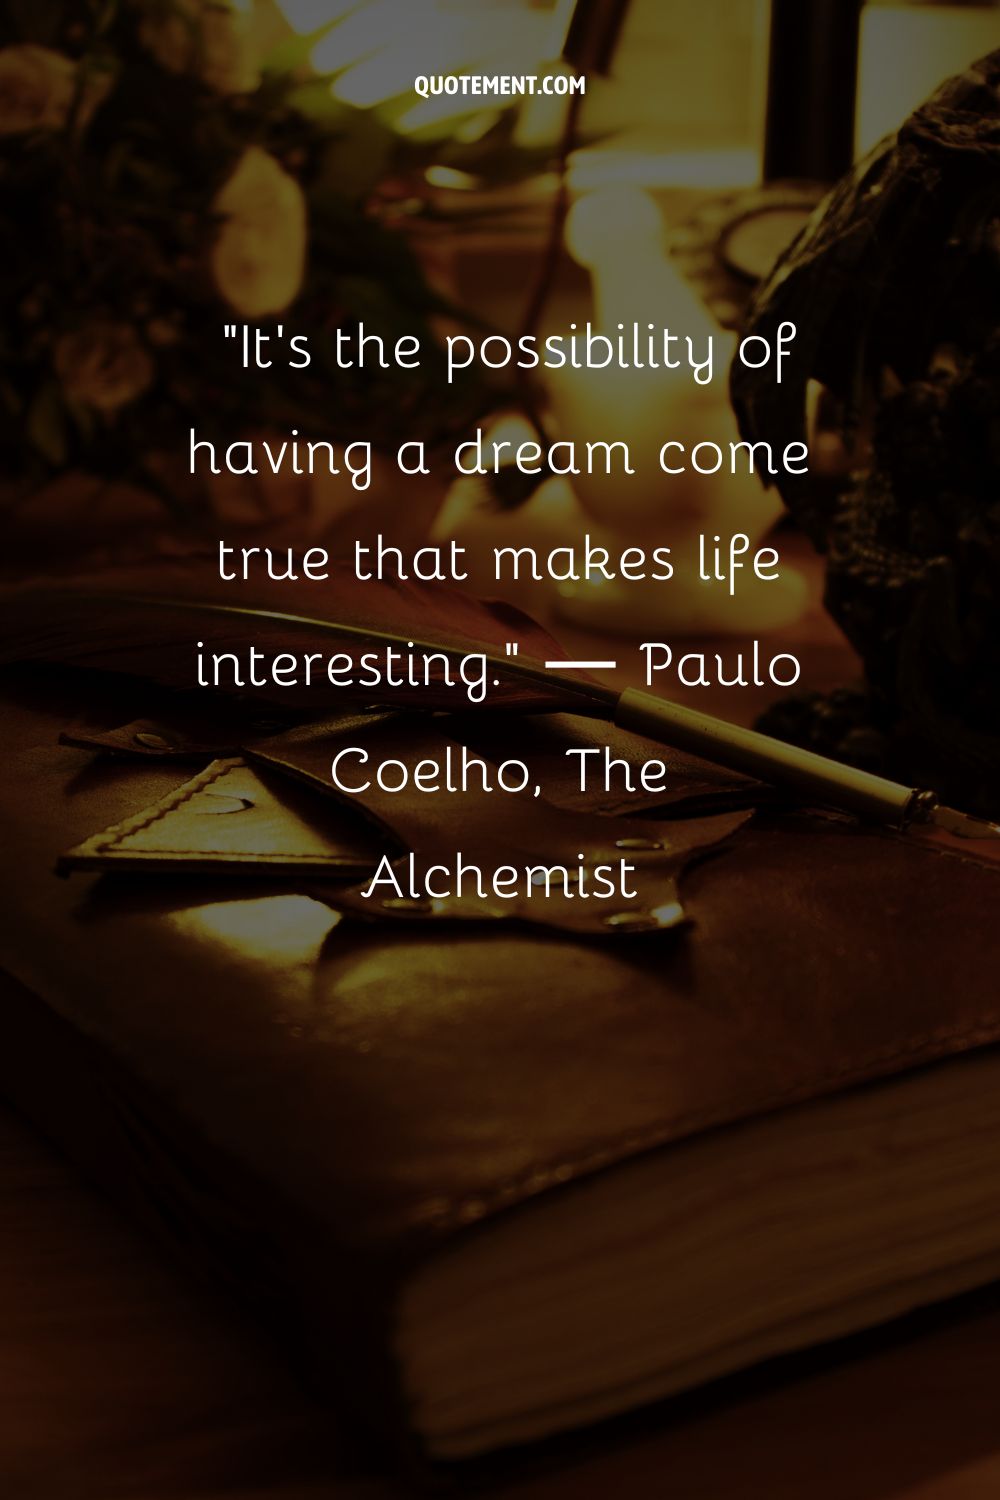 It's the possibility of having a dream come true that makes life interesting